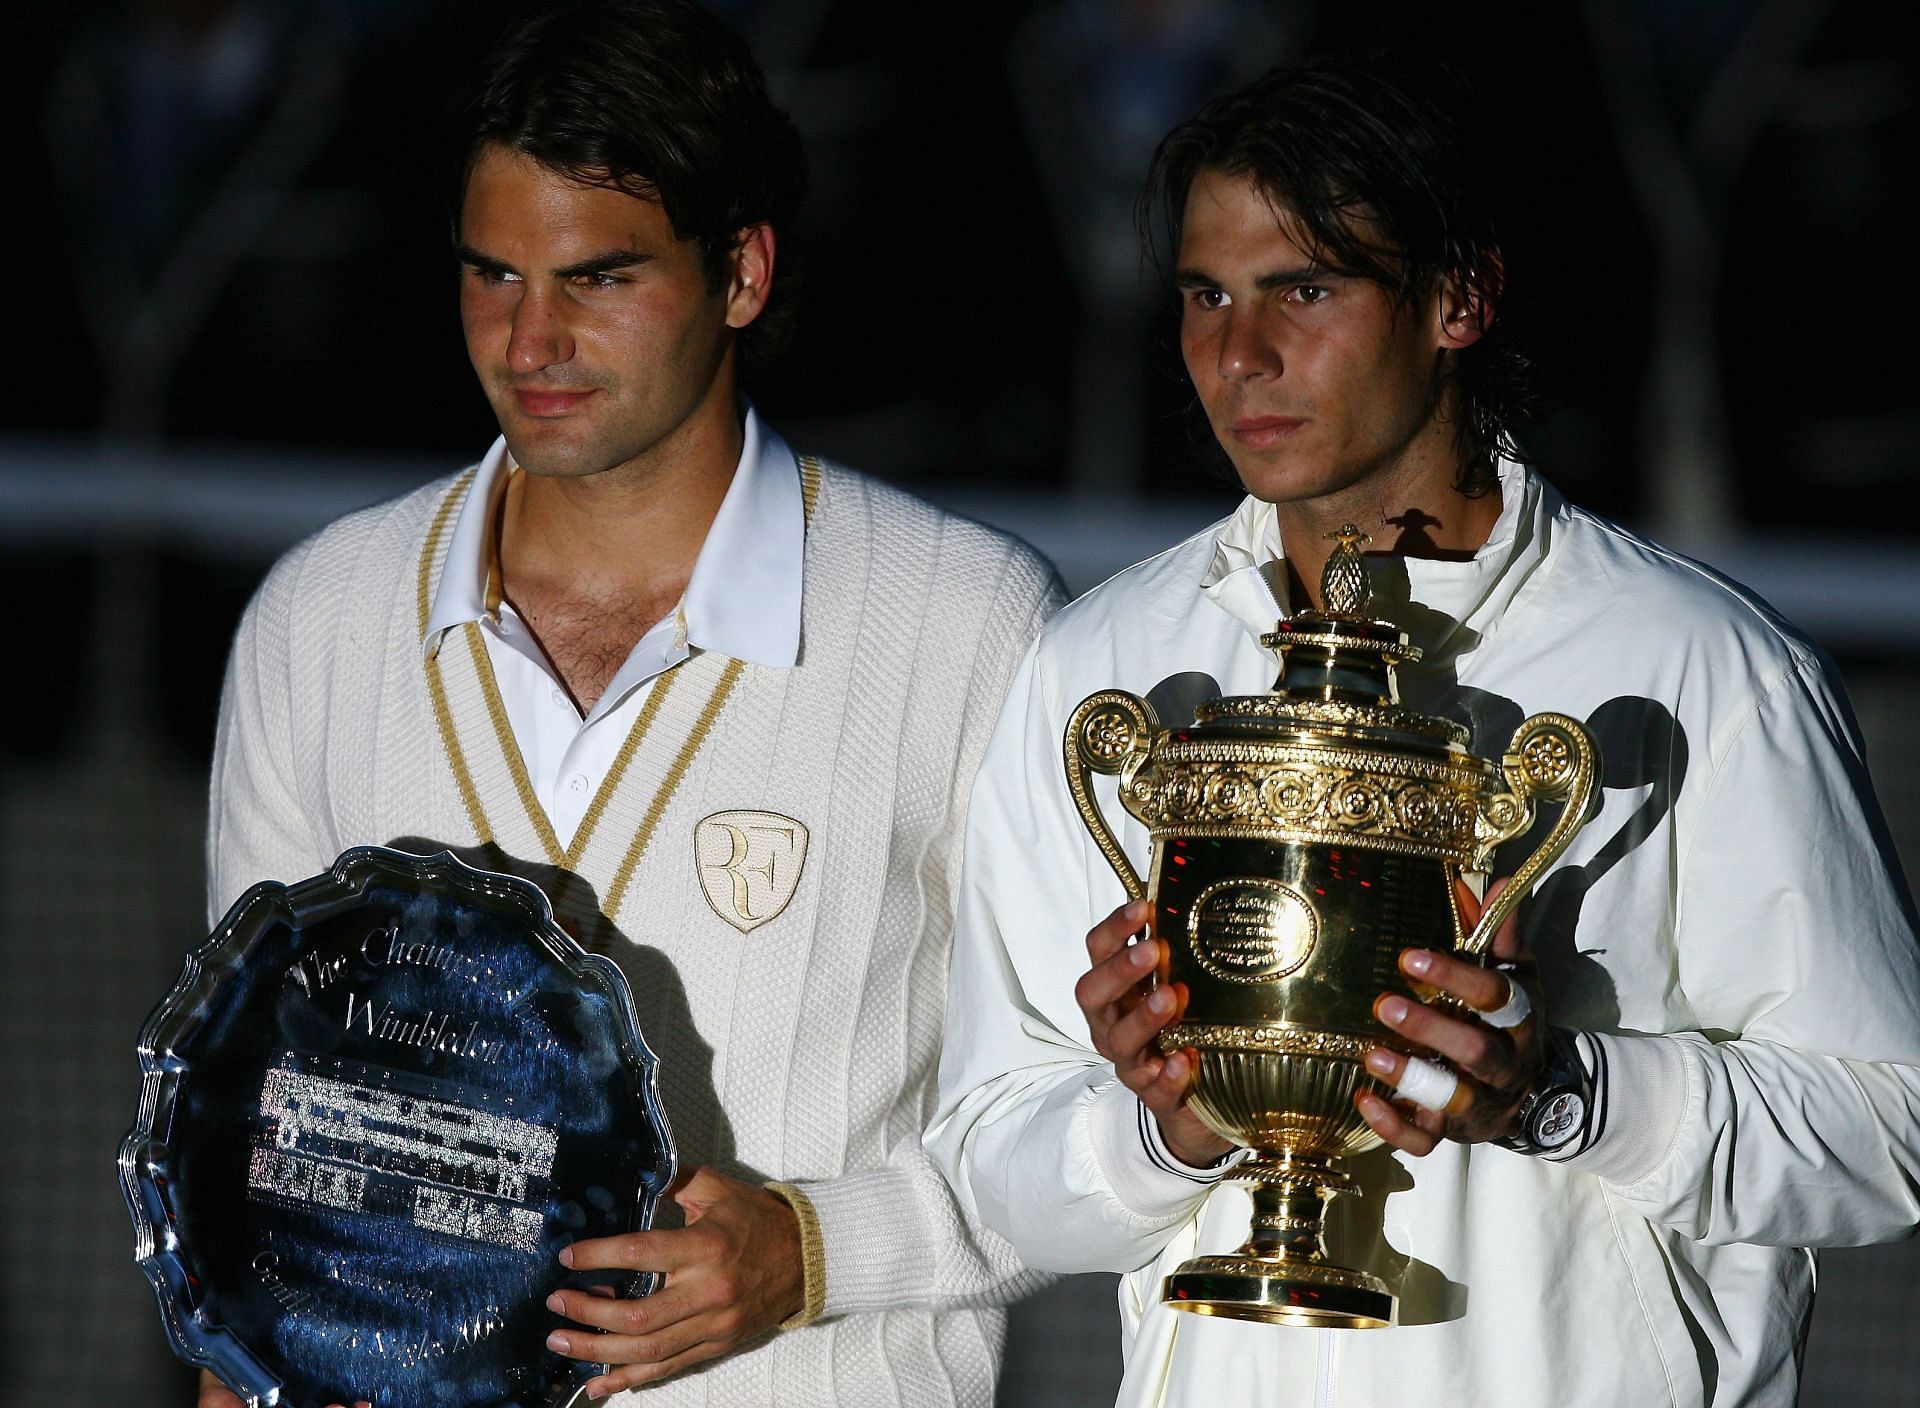 Wimbledon 2008 final was one for the ages